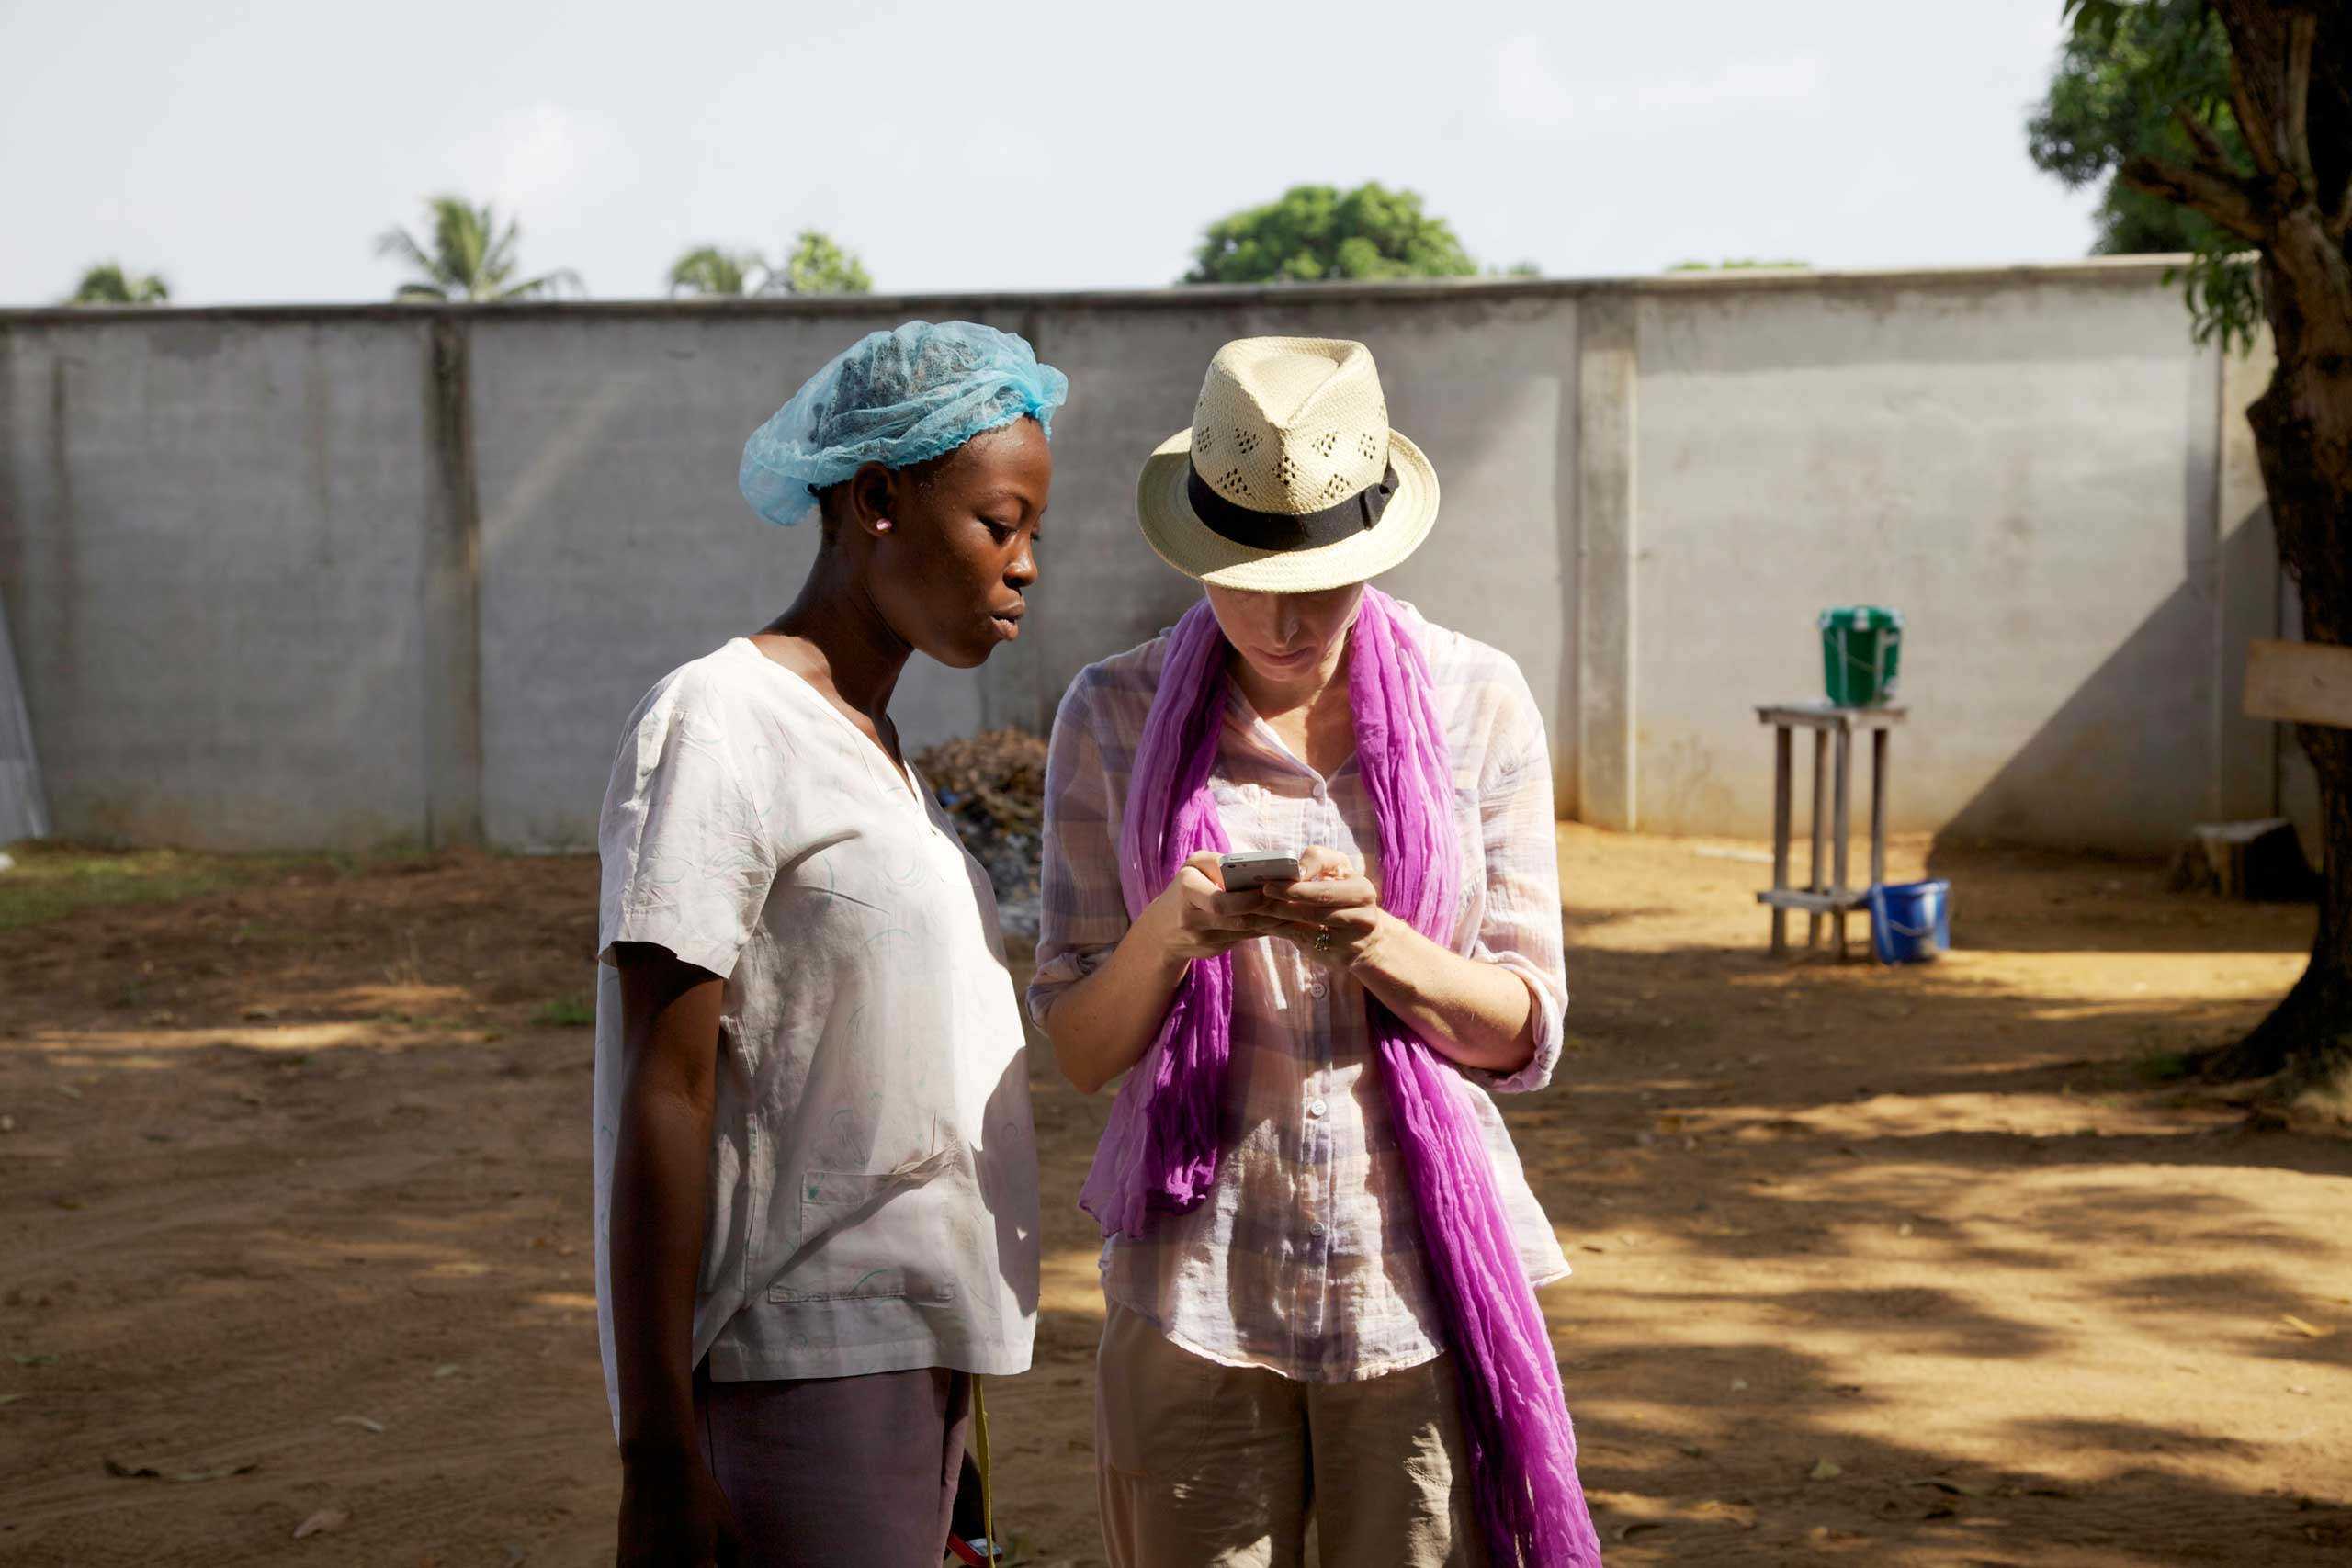 TIME's Africa Bureau Chief Aryn Baker (right) in Monrovia, Liberia (Jackie Nickerson for TIME)